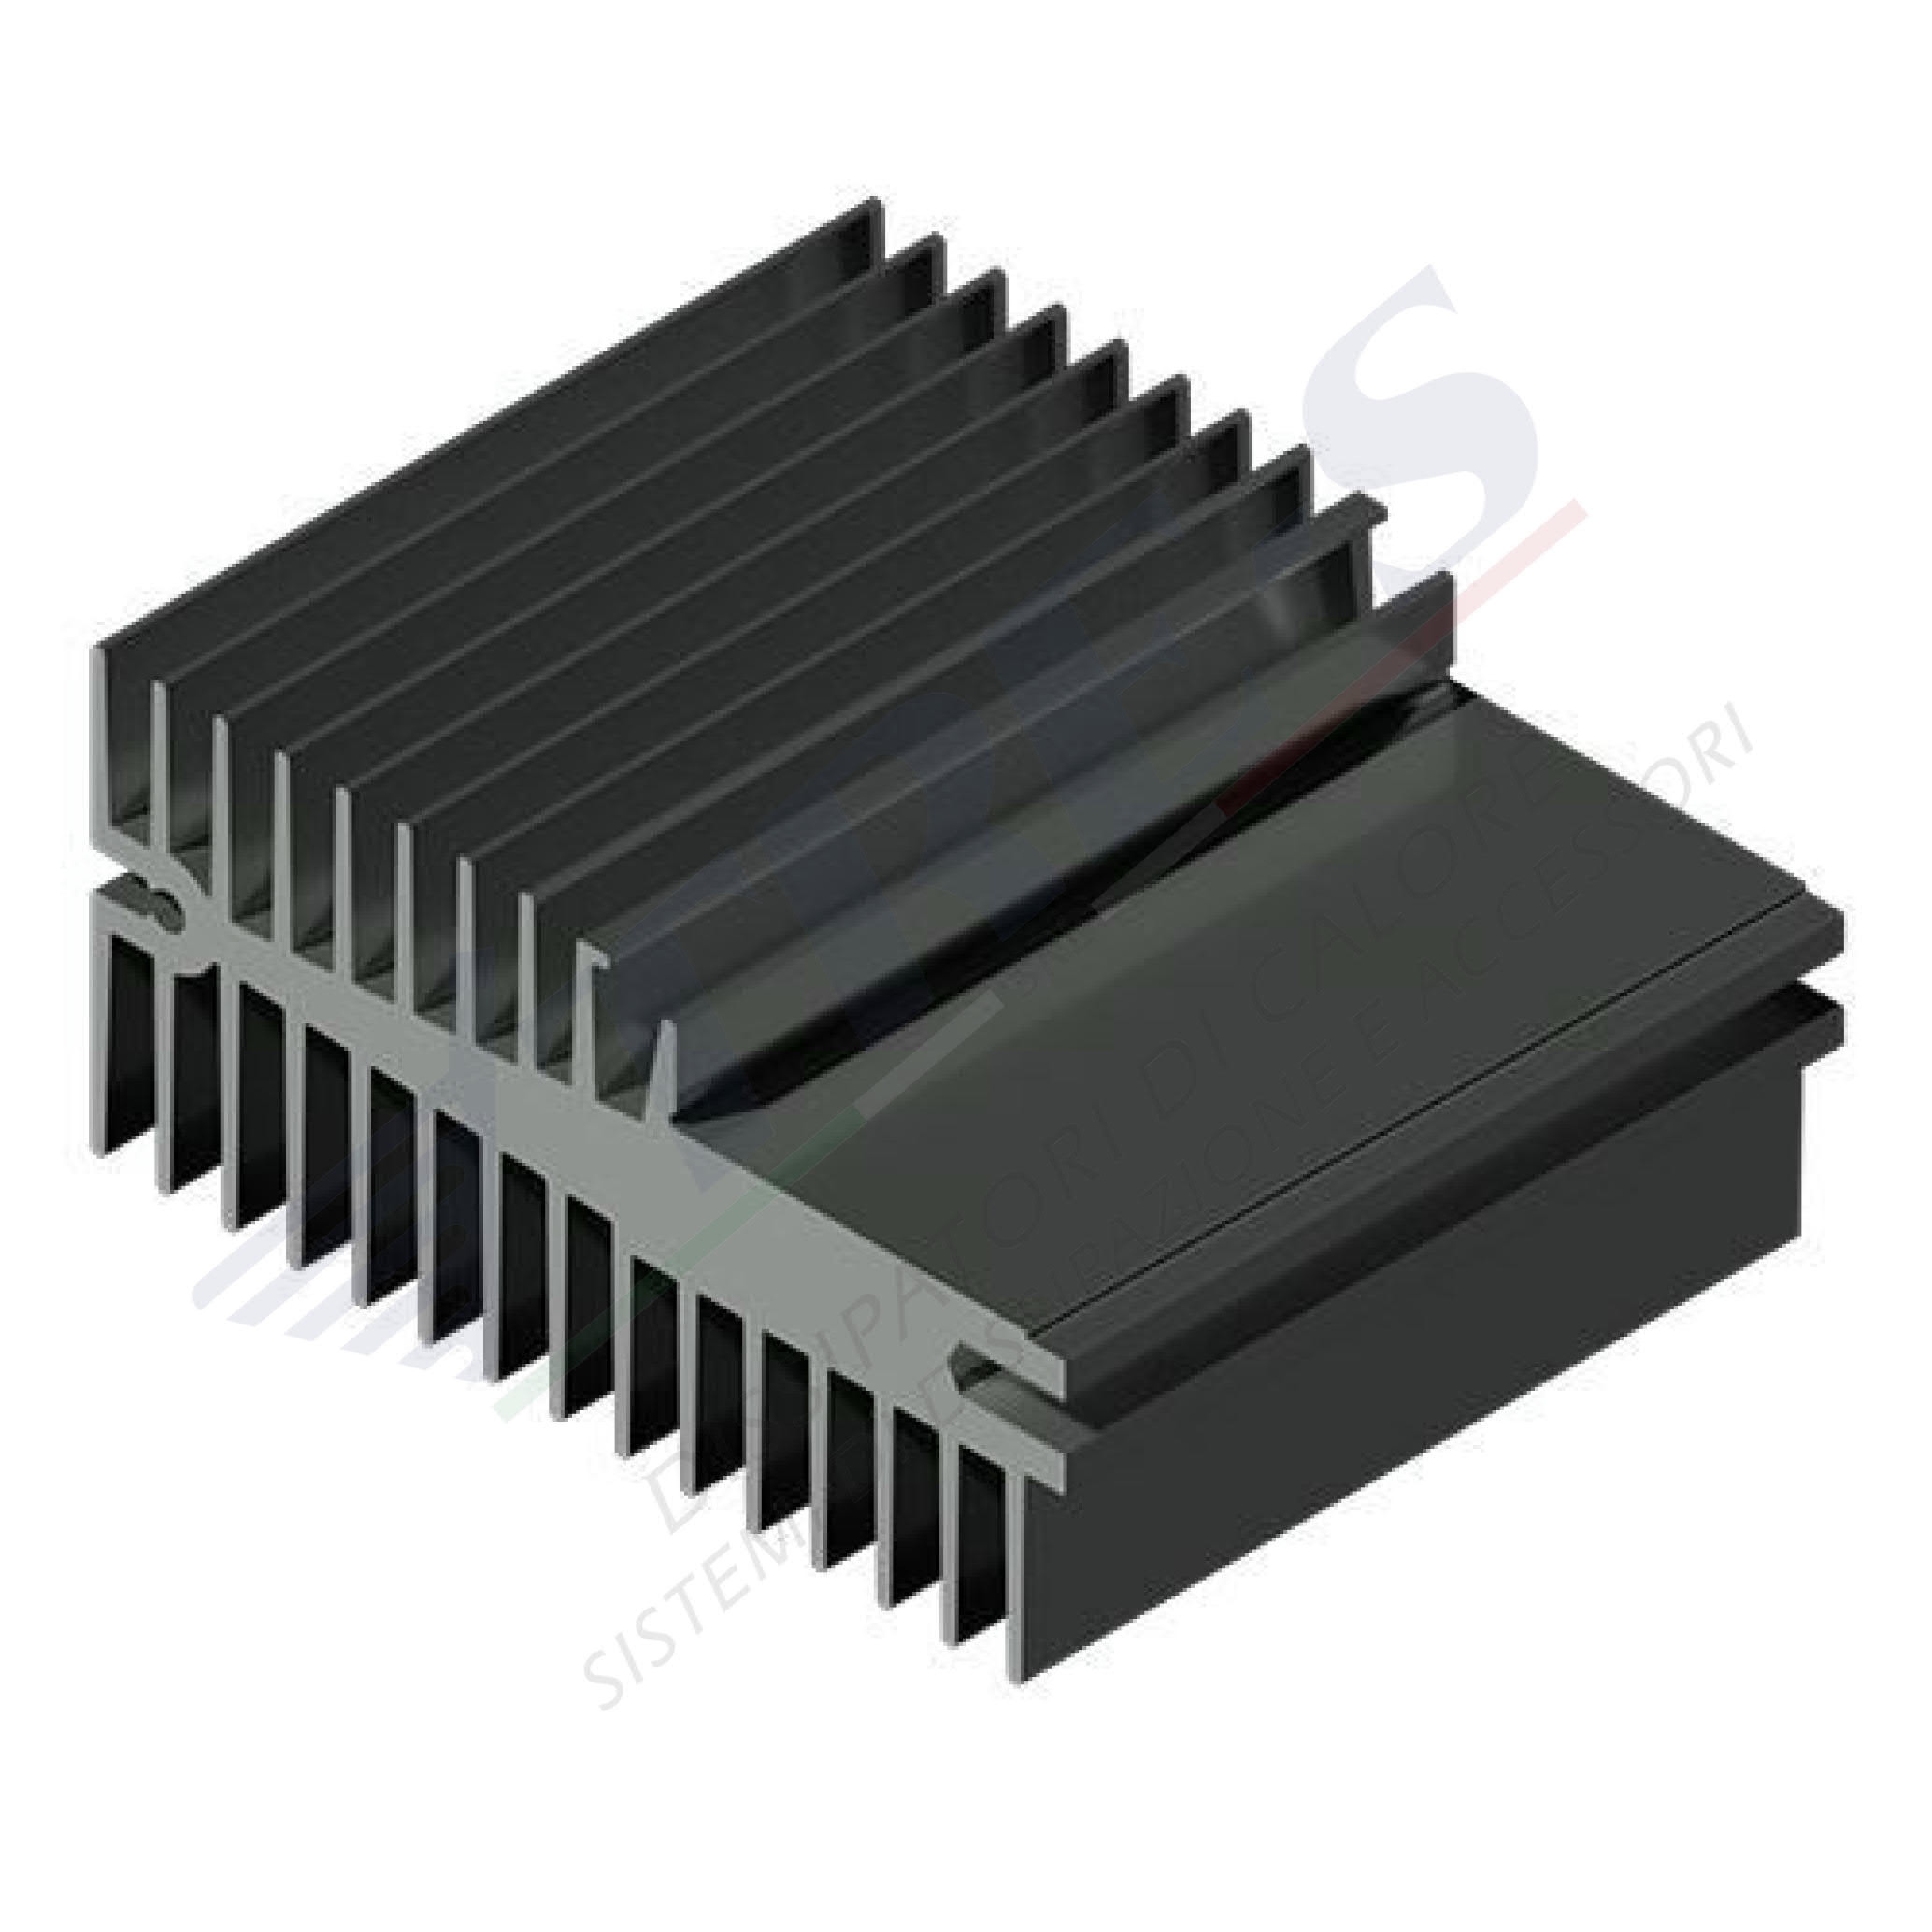 PRO1306 - Heat sinks with clip system